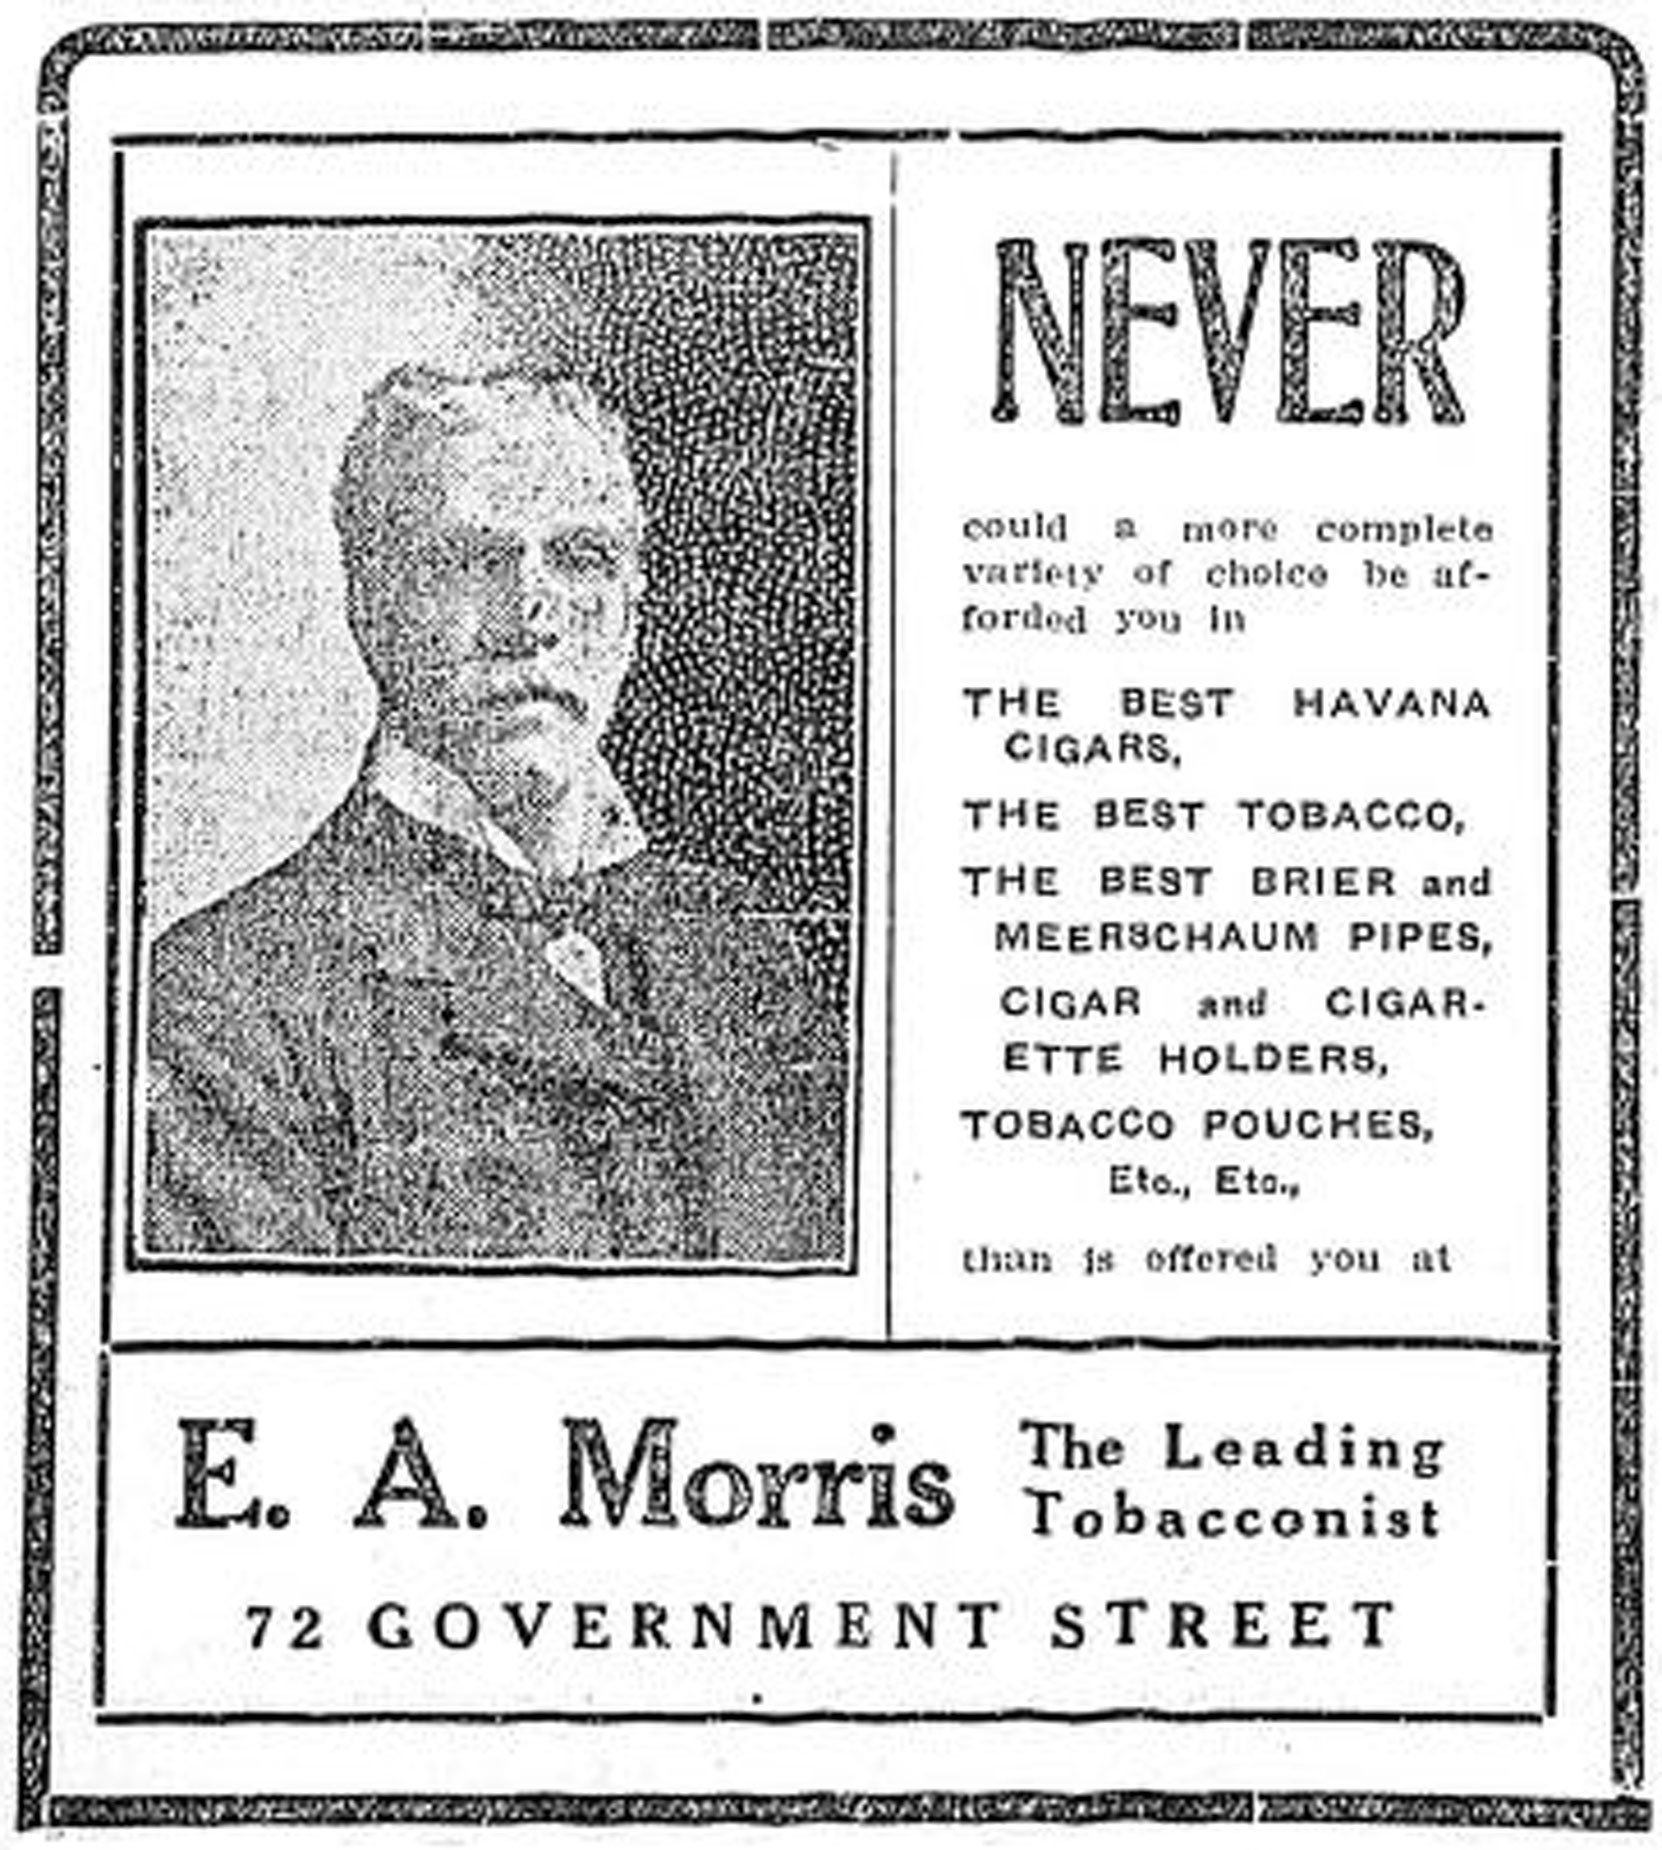 1907 advertisement for E.A. Morris, The Leading Tobacconist. 72 Government Street is now 1116 Government Street and E.A. Morris is still in business at that location. (Victoria Online Sightseeing Tours collection)